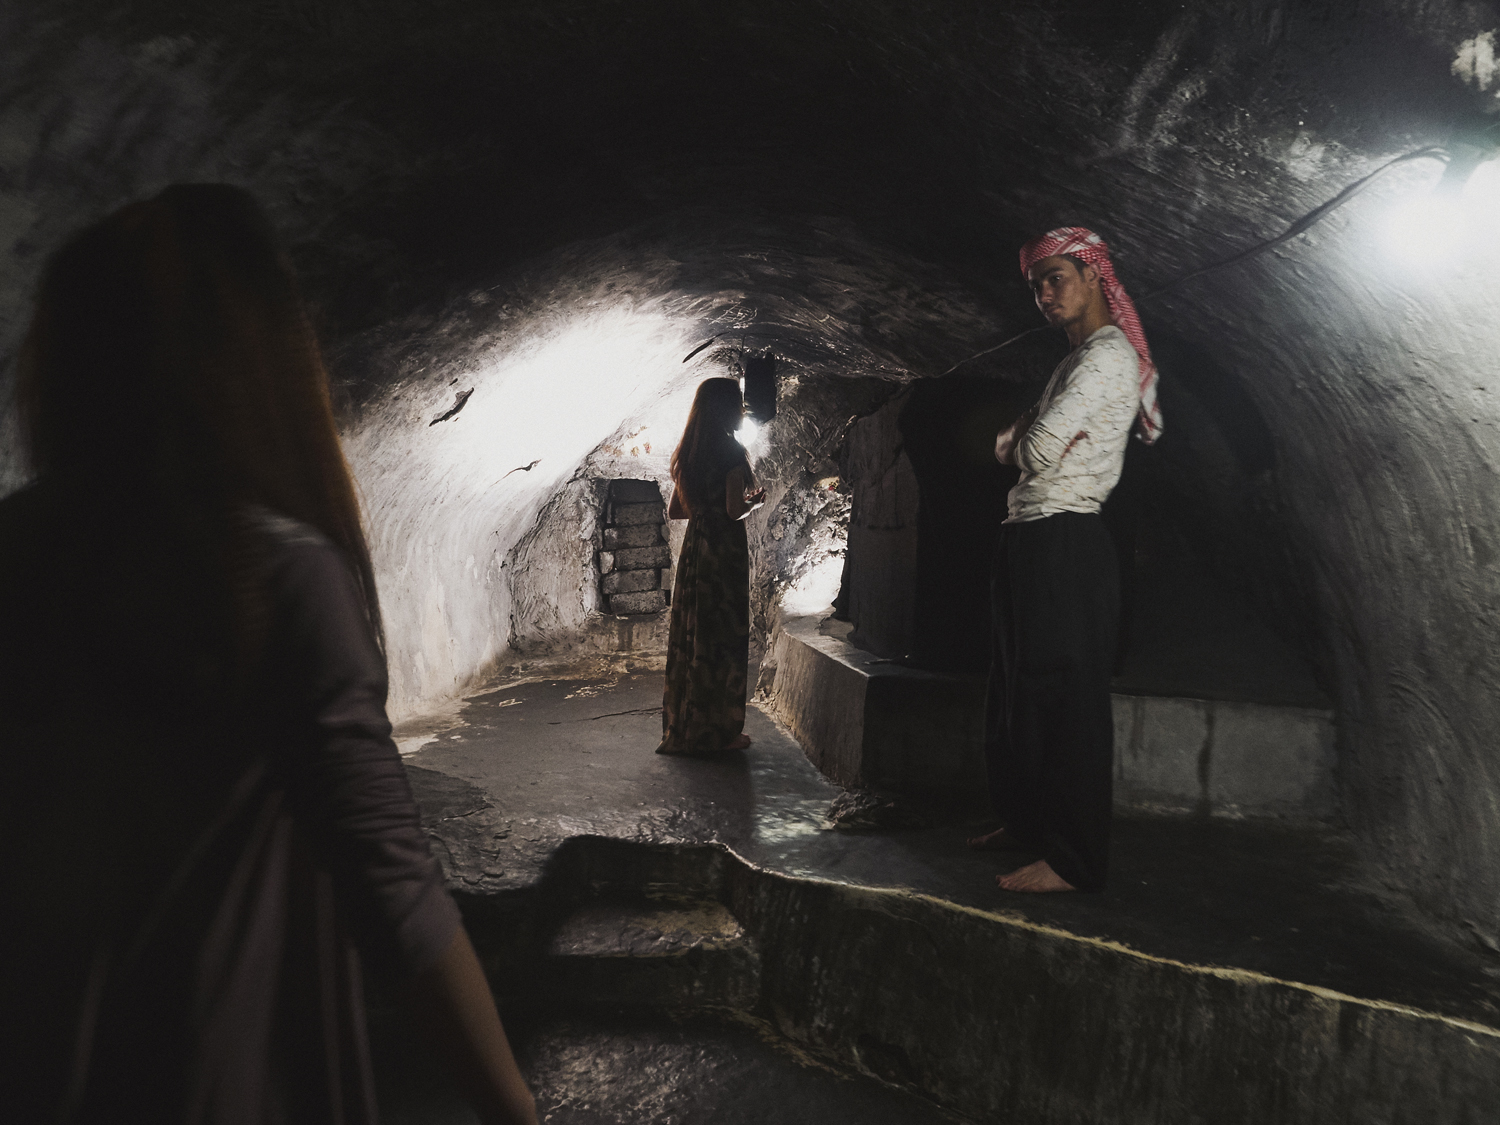 Lalish, Northern Iraq. The holy spring underneath the temple dates back 4000 years, but Yazidi culture was established by Sheikh Adi ibn Musafir al-Umawi in the 1100s. His tomb lies at the furthest point of the temple tunnels, and is under guard from a young spiritual healer-in-training.